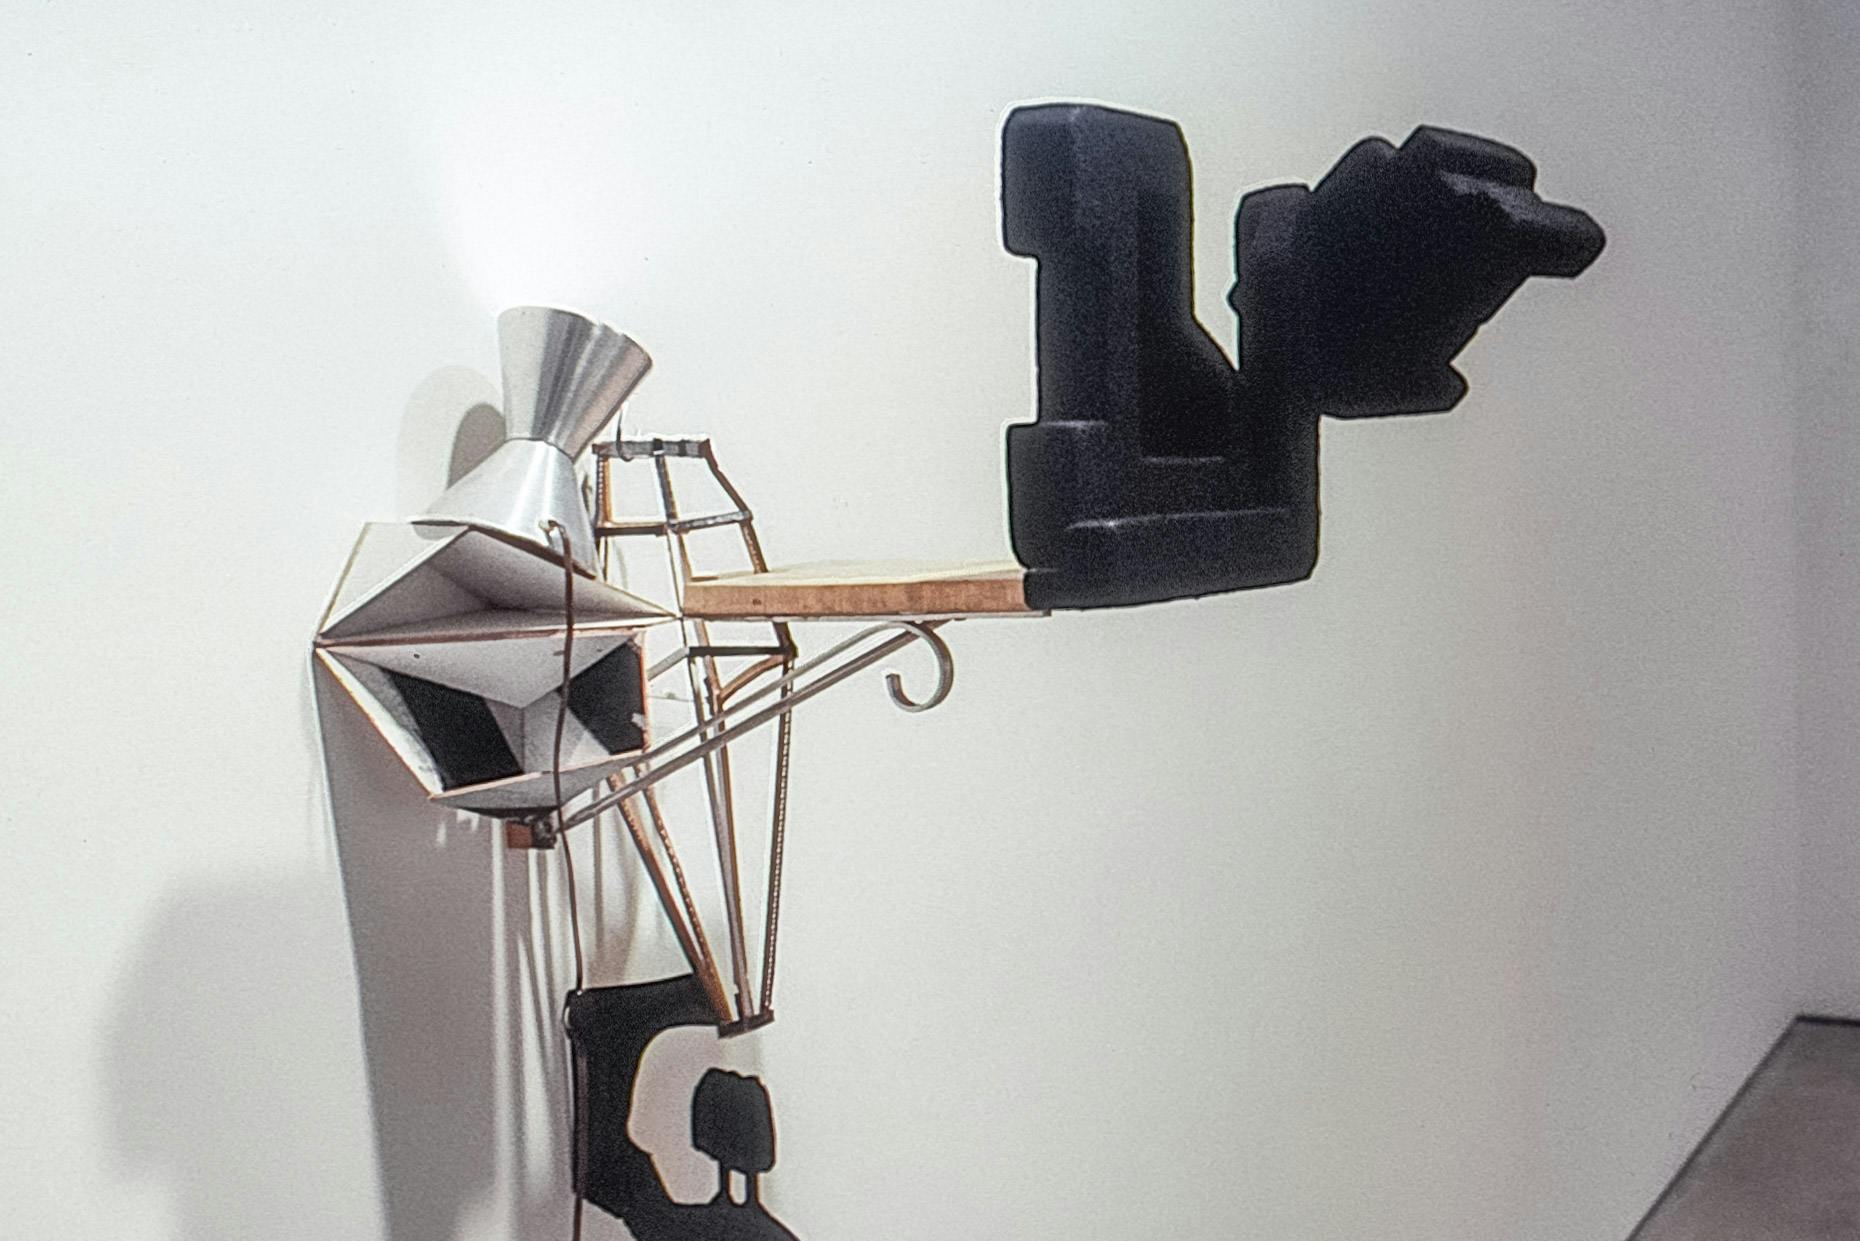 A closeup of a sculpture mounted on a white wall. The sculpture is made of many different items, including a double shot jigger, a small wood plank, a metal plant hook, and geometric black foam forms.